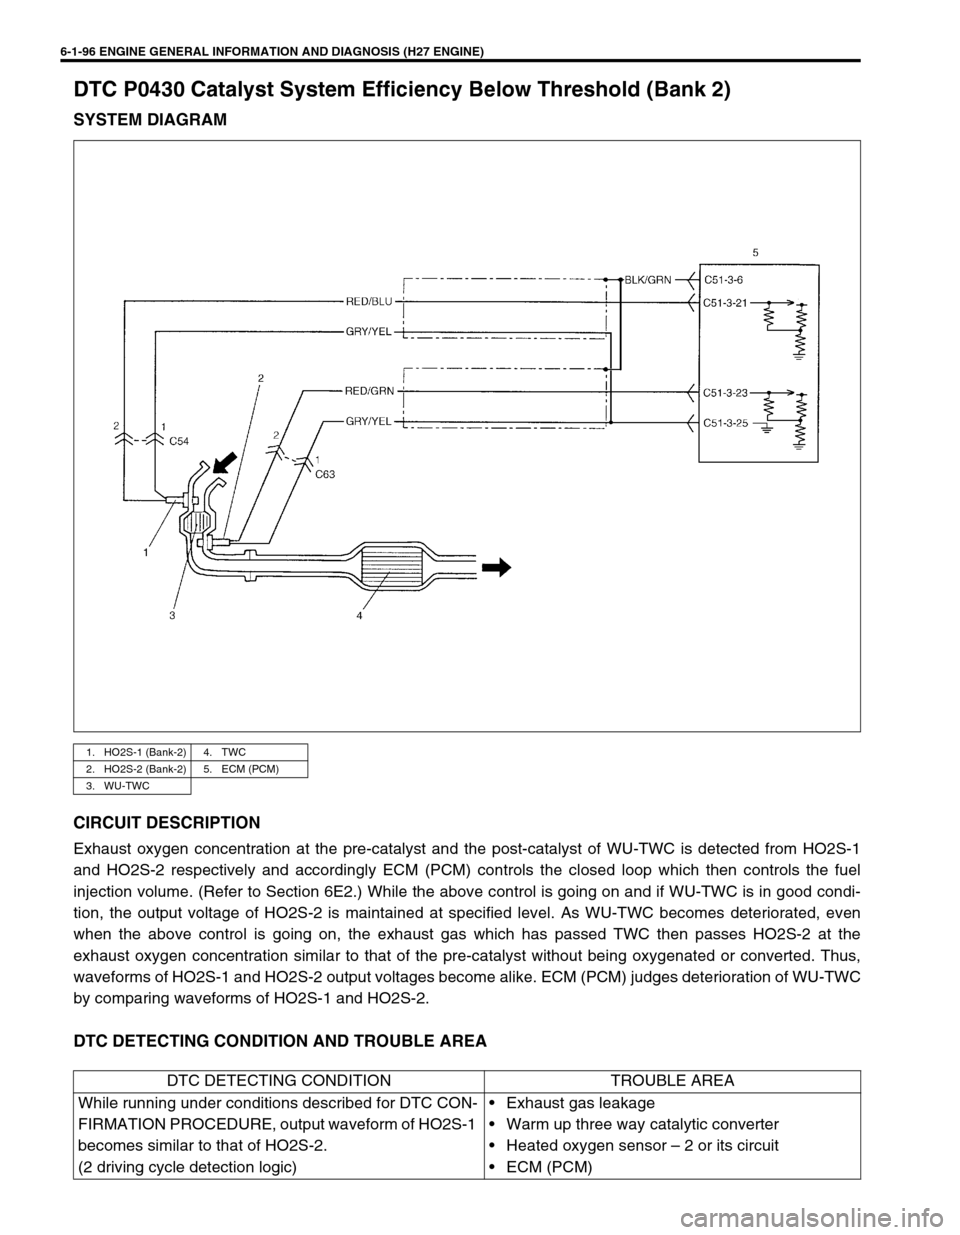 SUZUKI GRAND VITARA 2001 2.G Owners Manual 6-1-96 ENGINE GENERAL INFORMATION AND DIAGNOSIS (H27 ENGINE)
DTC P0430 Catalyst System Efficiency Below Threshold (Bank 2)
SYSTEM DIAGRAM
CIRCUIT DESCRIPTION
Exhaust oxygen concentration at the pre-ca